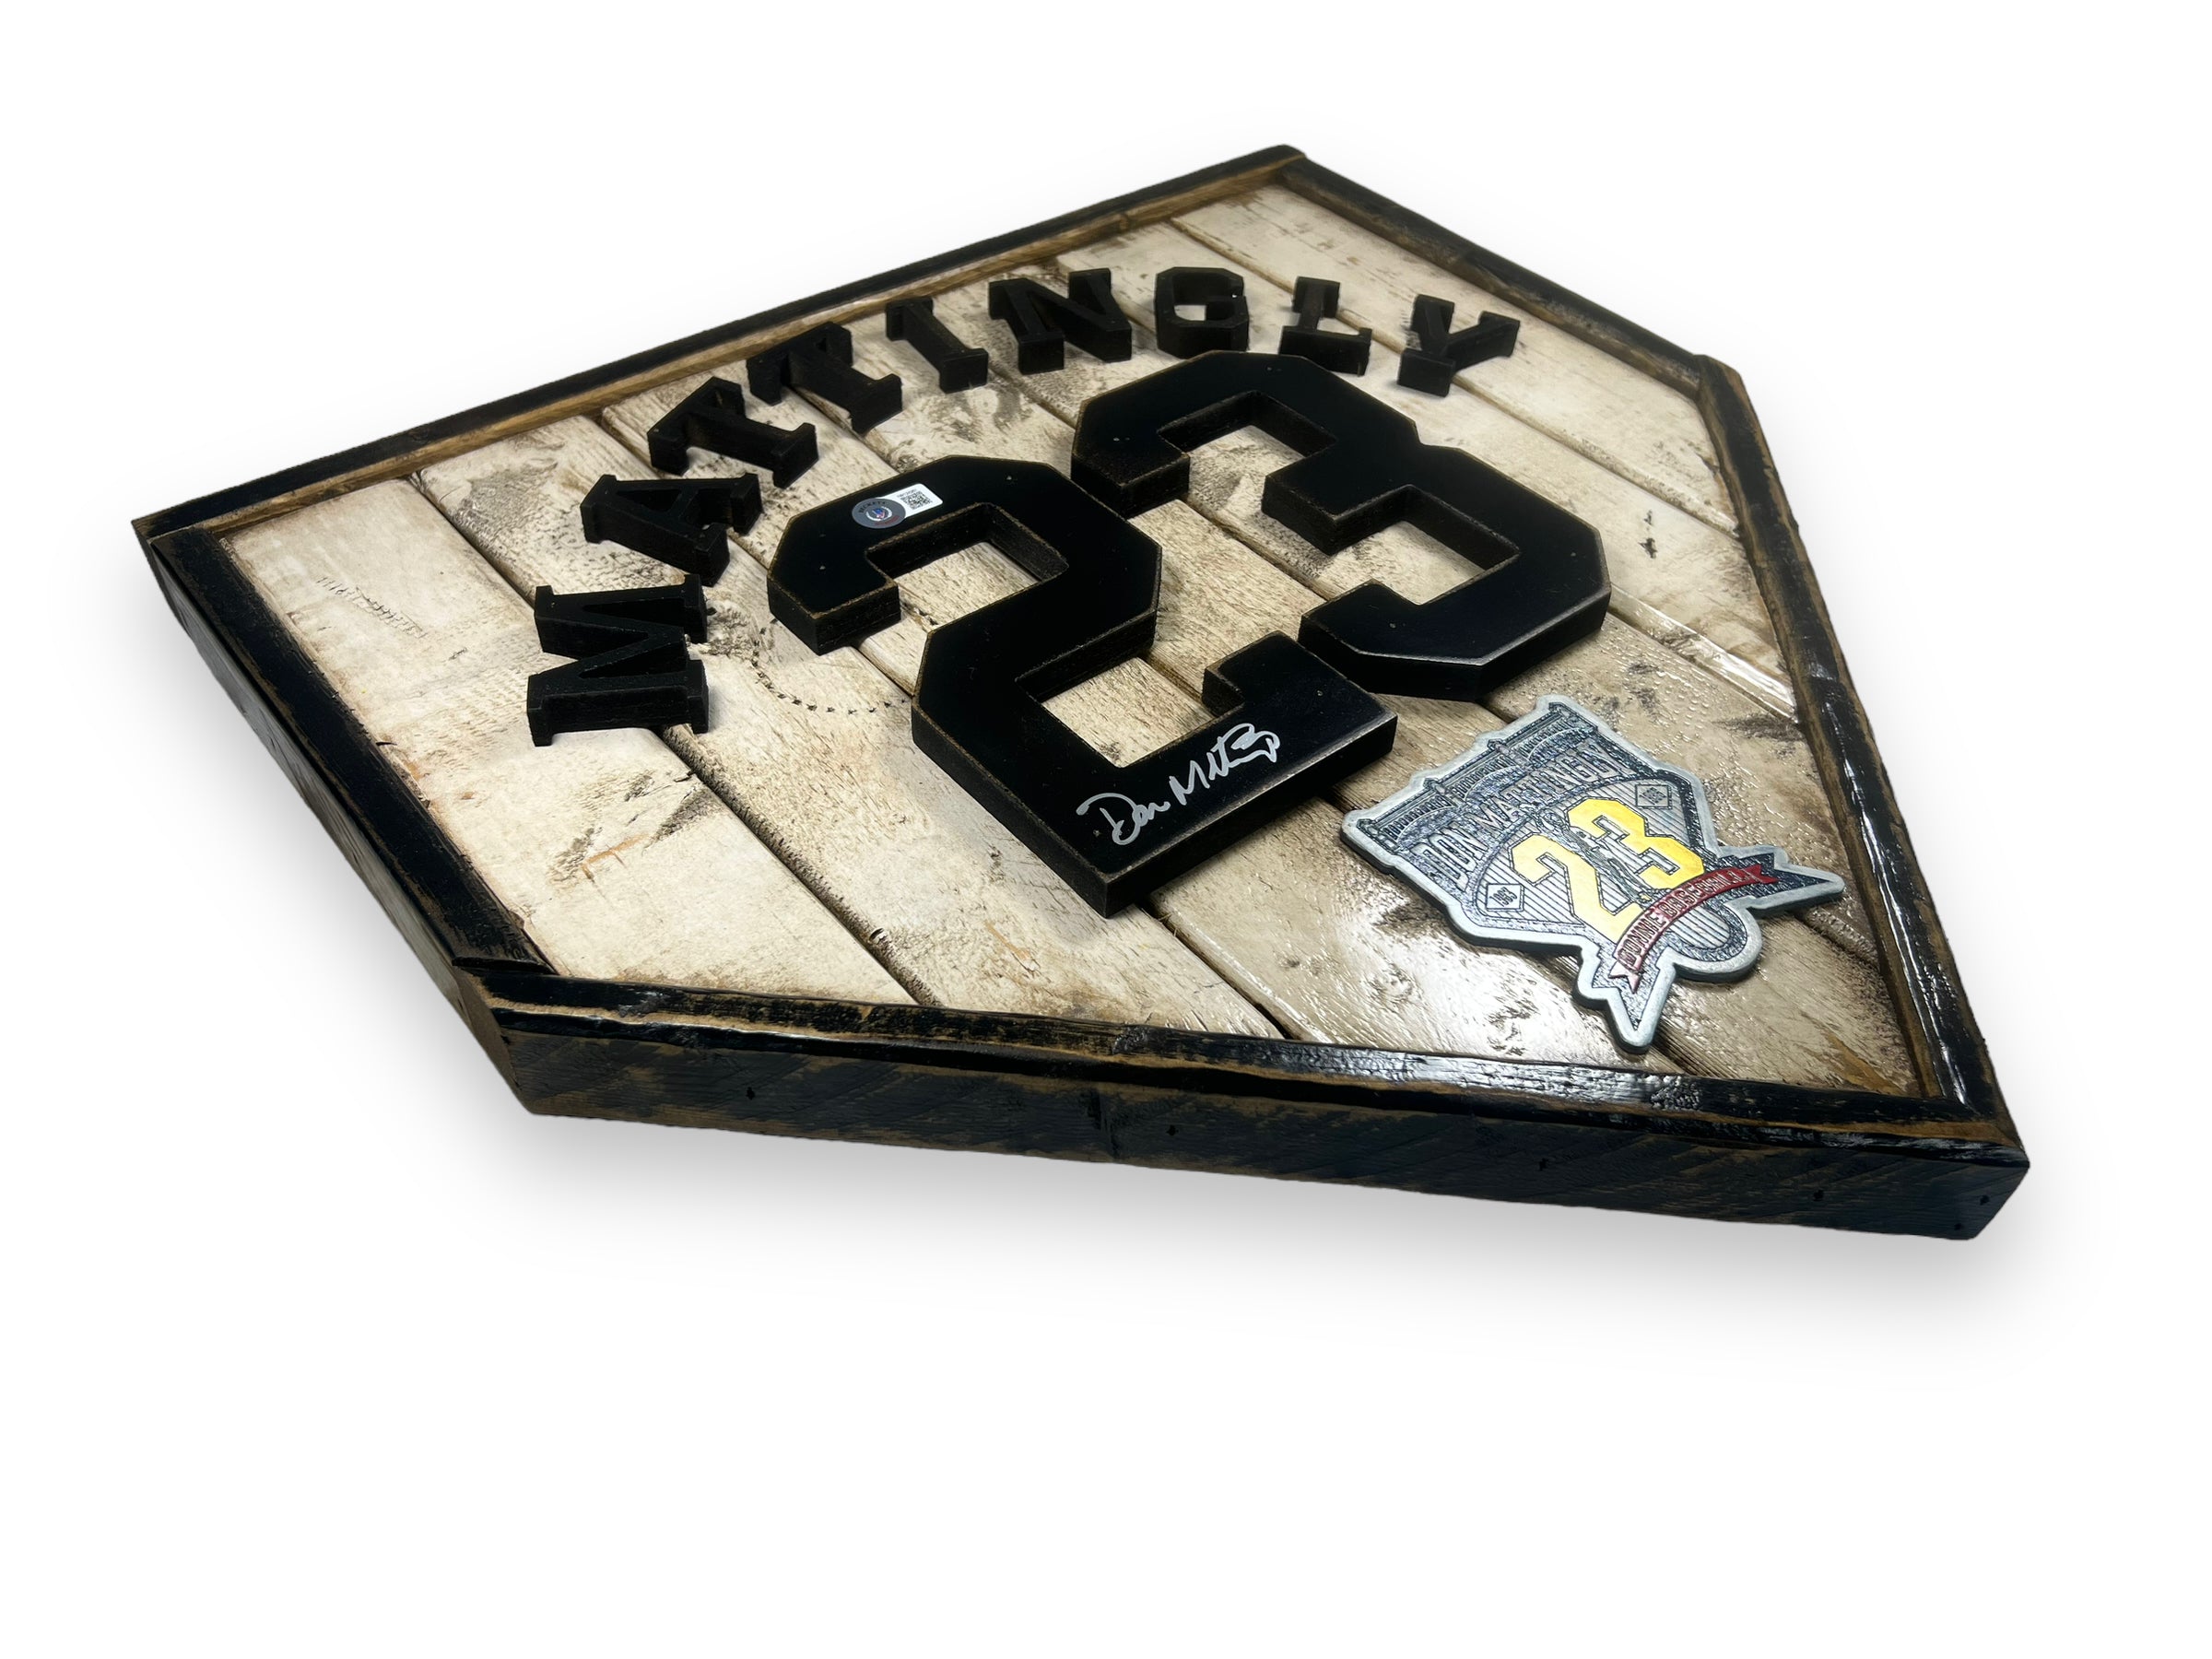 Don Mattingly "Donnie Baseball" Legacy Home Plate